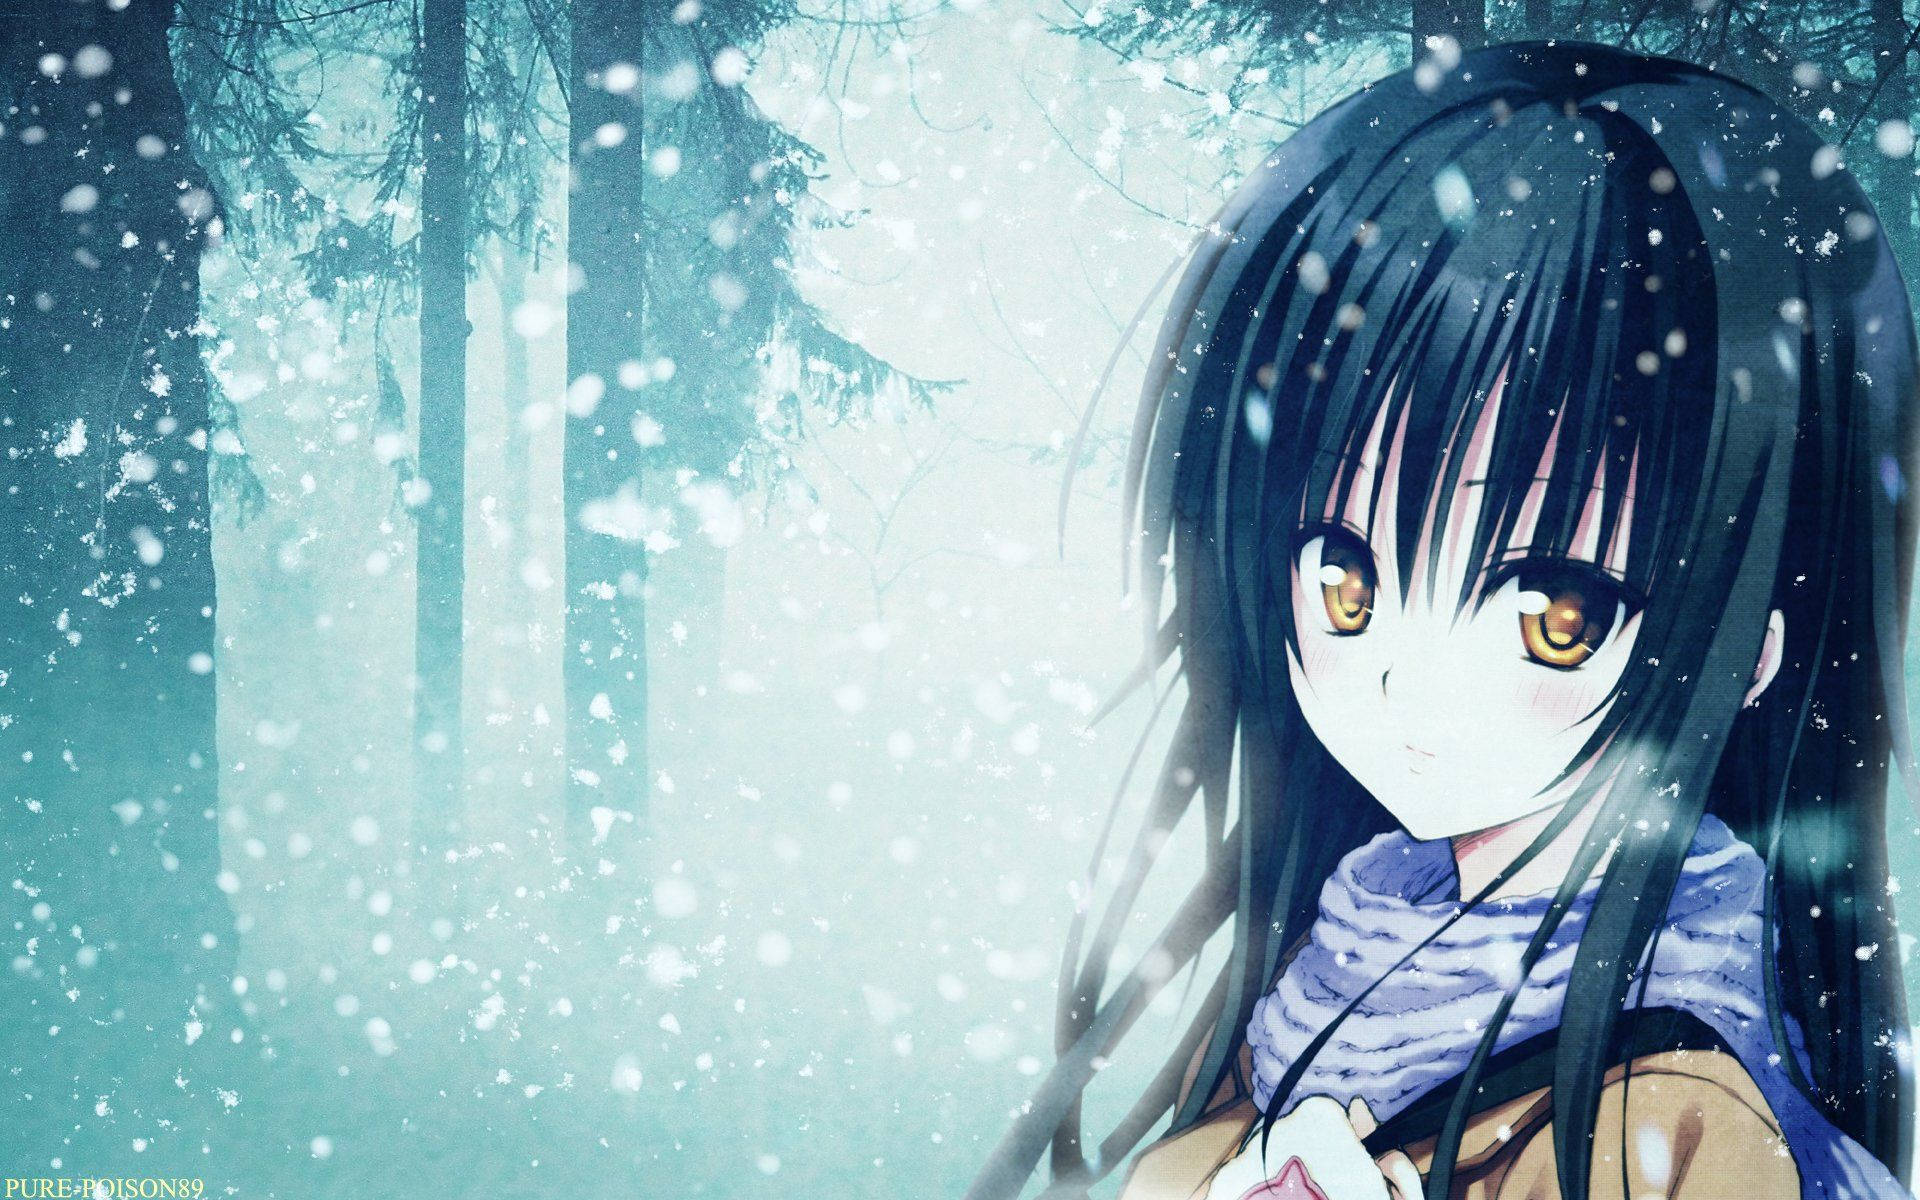 A Sad Anime Girl Lost in the Snow Wallpaper